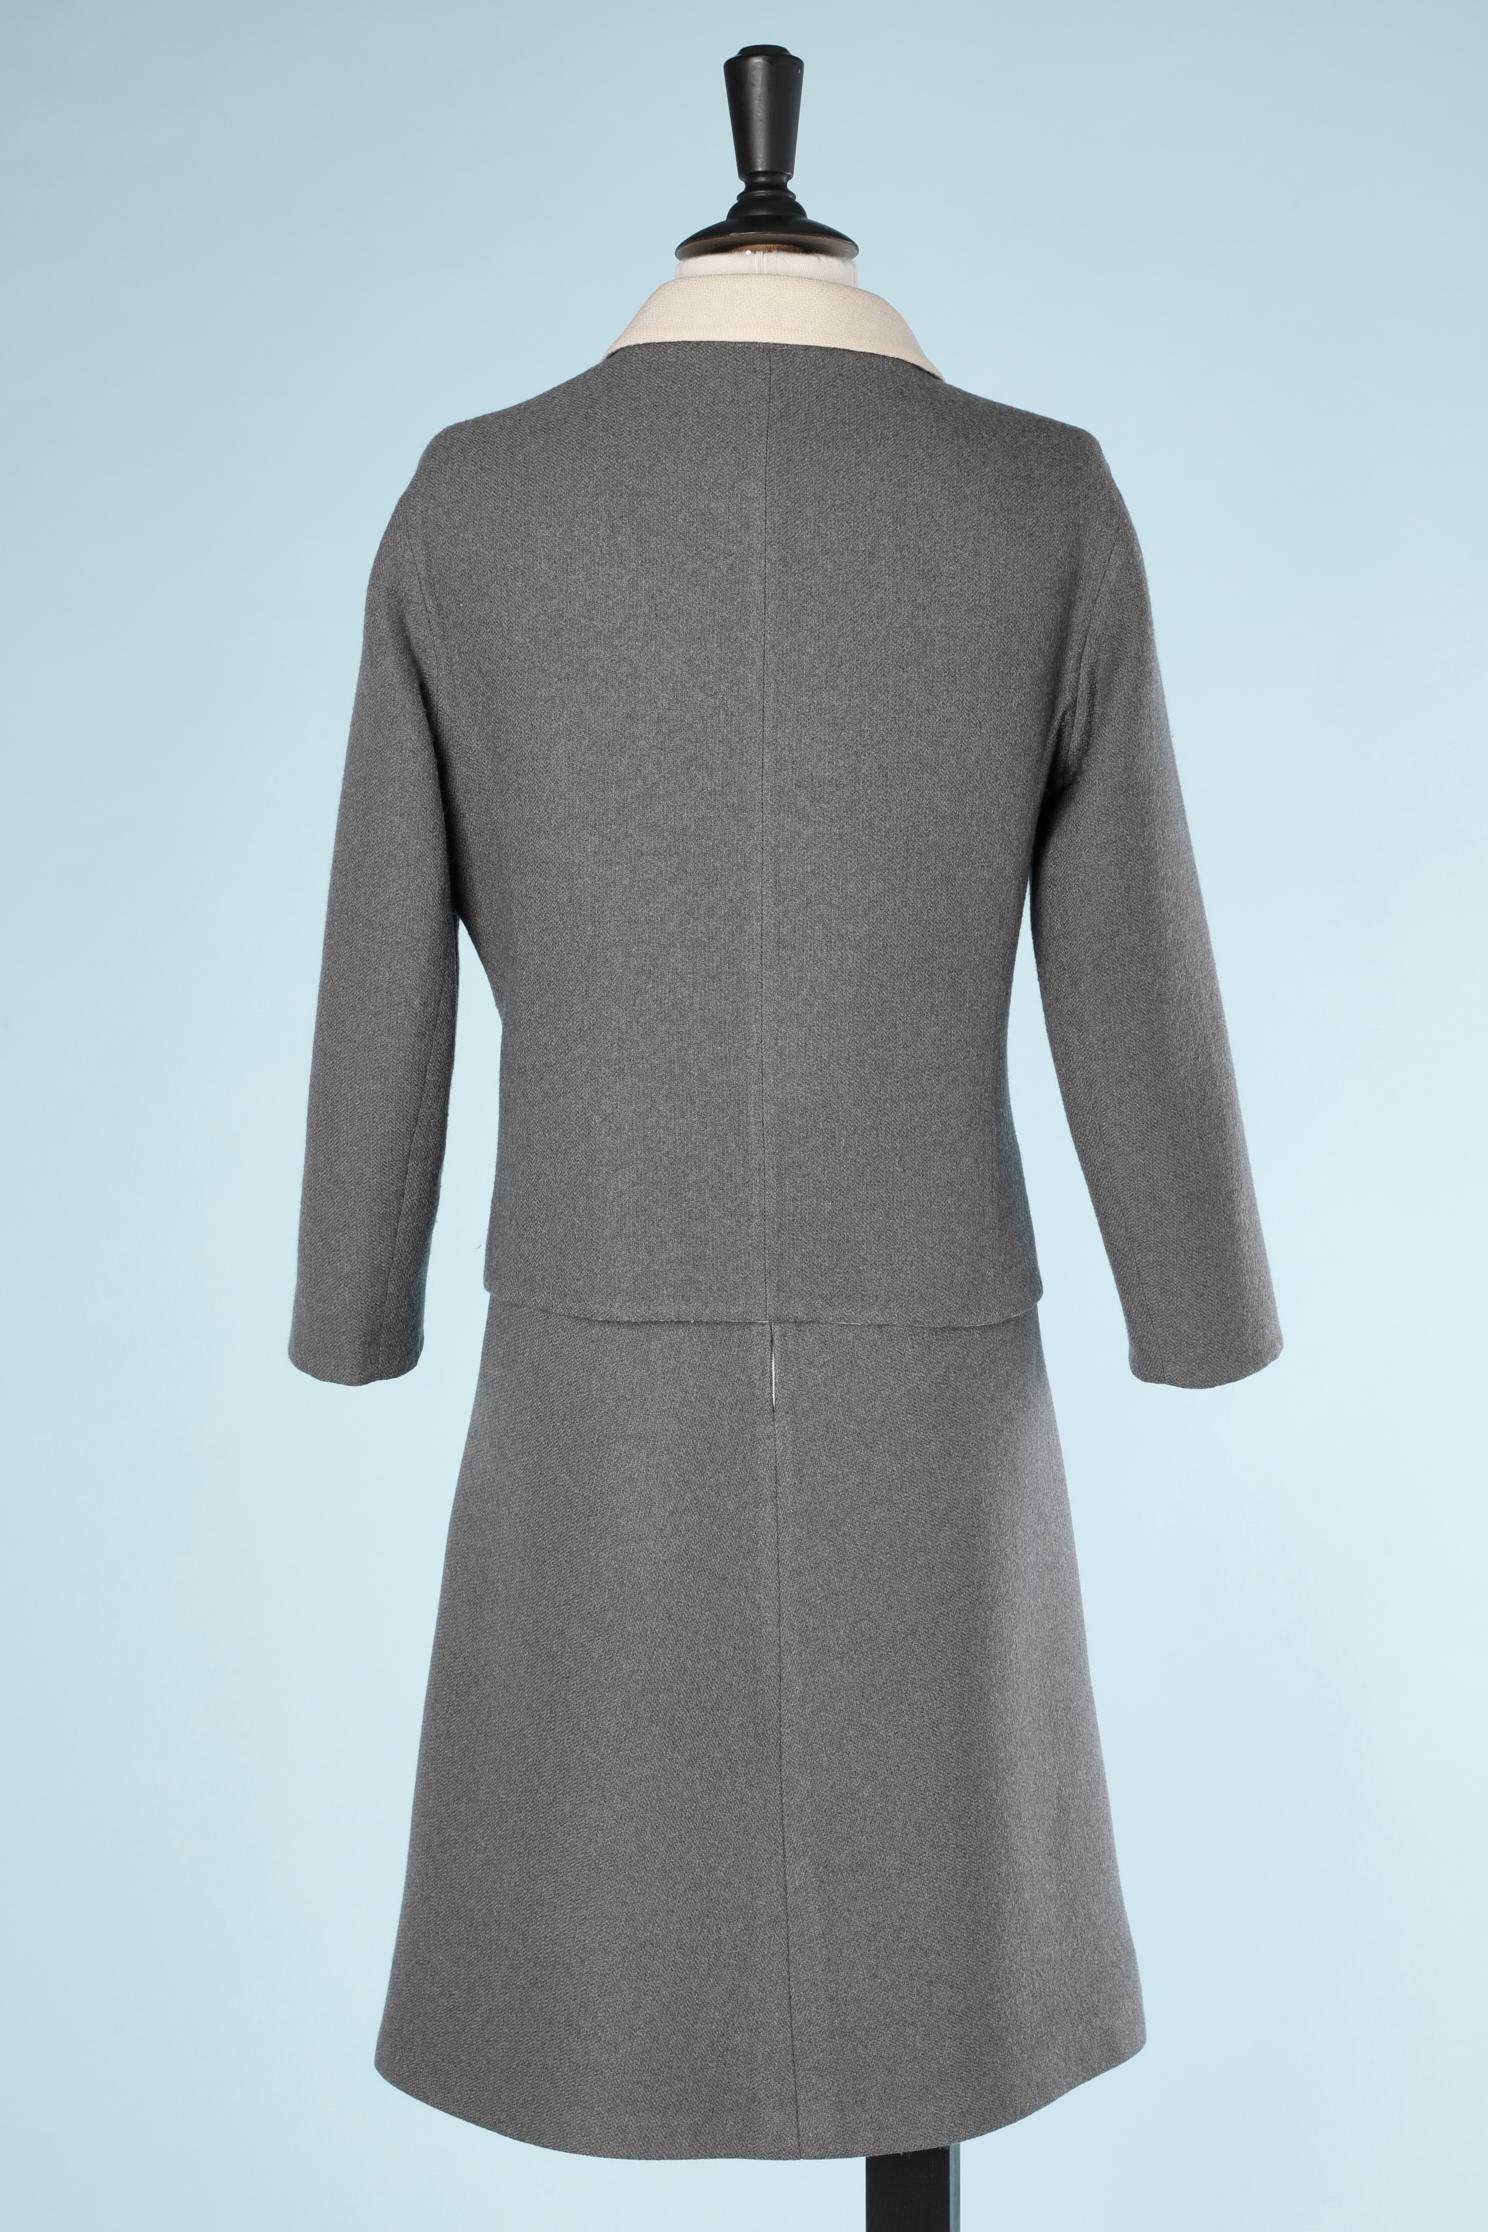 Women's 1960's dress-suit and hat ensemble bi-colore grey and off-white wool double face